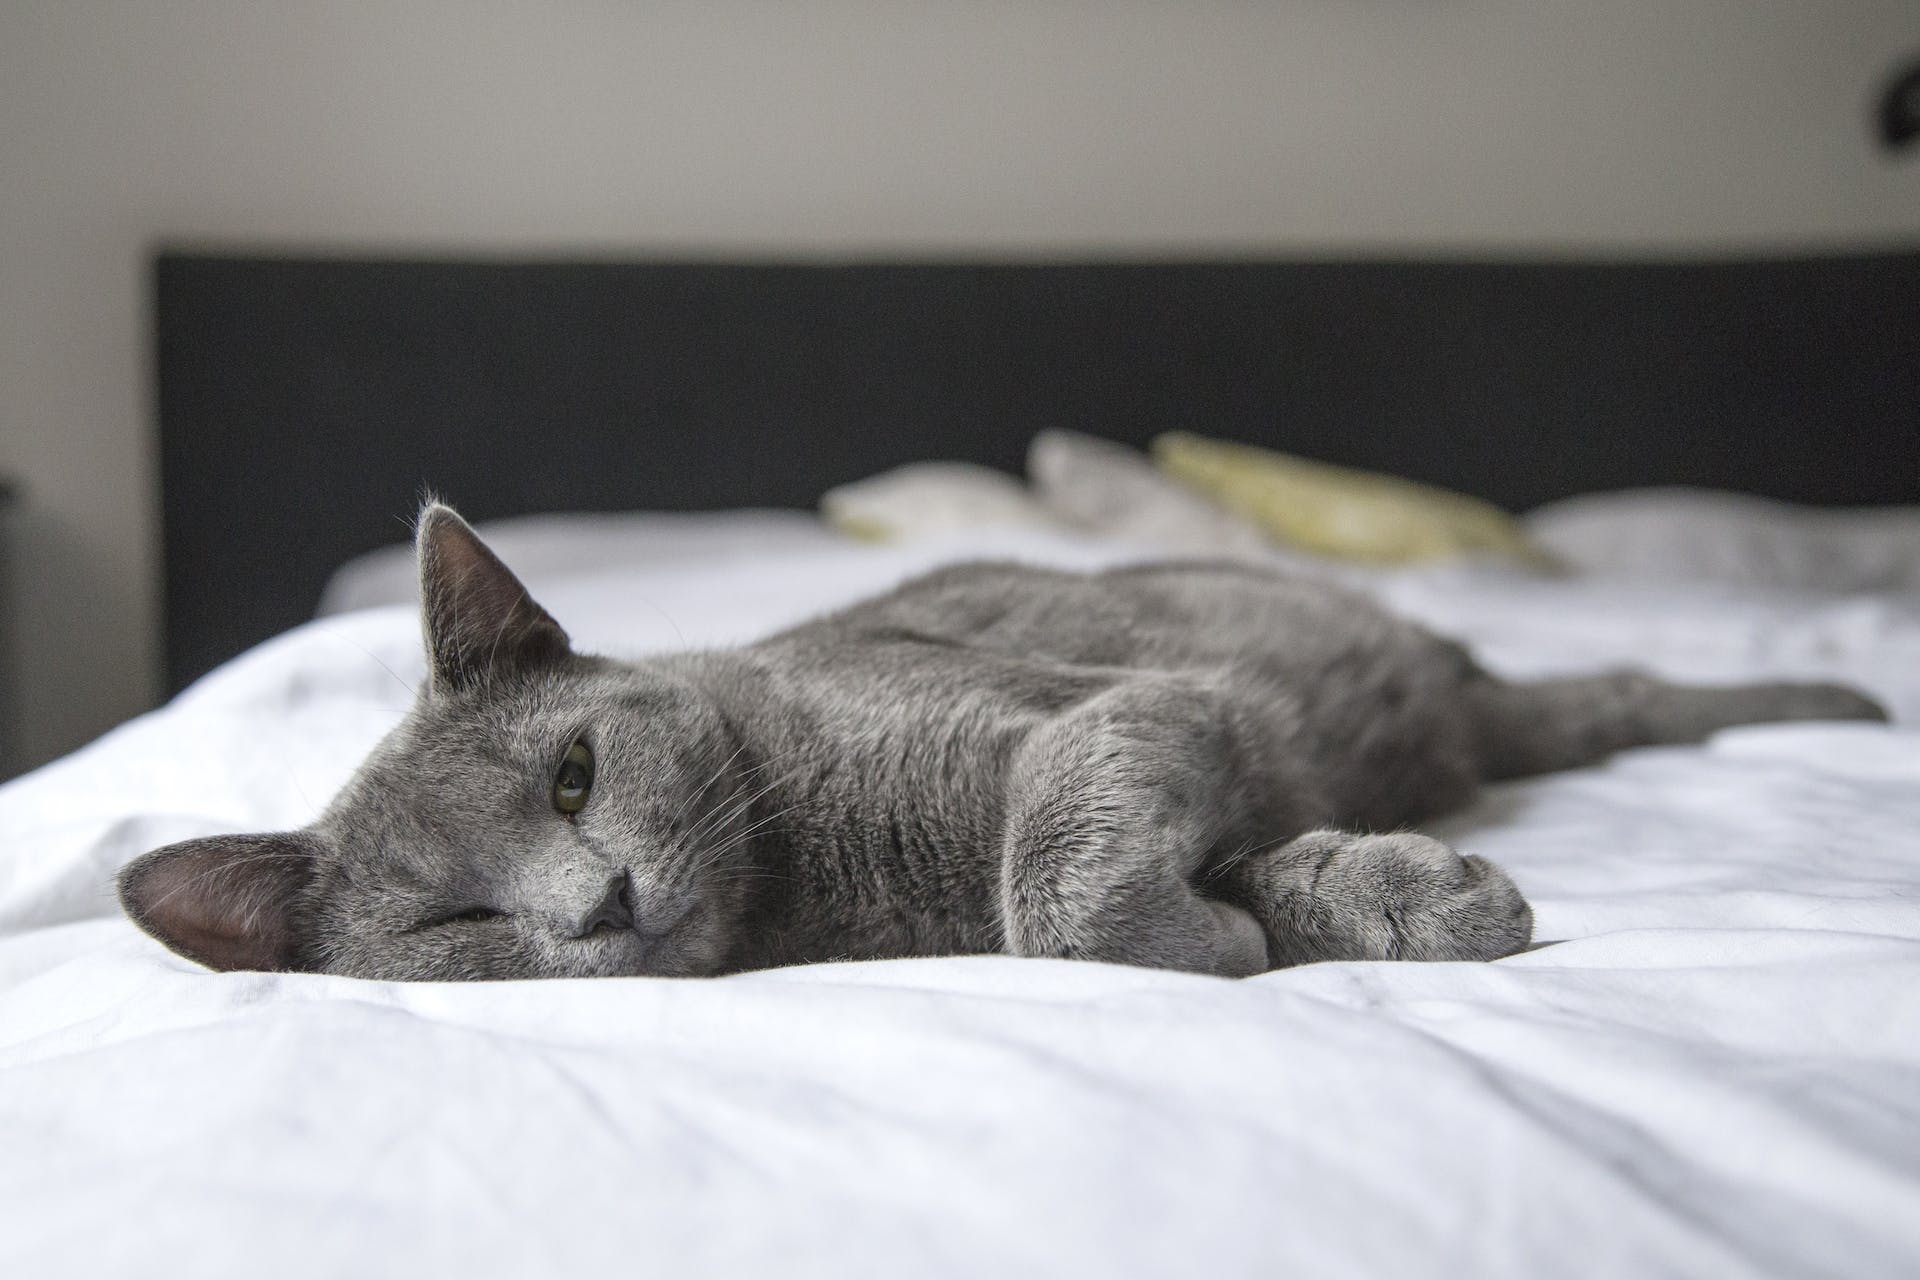 Cat lying on bed | Source: Pexels